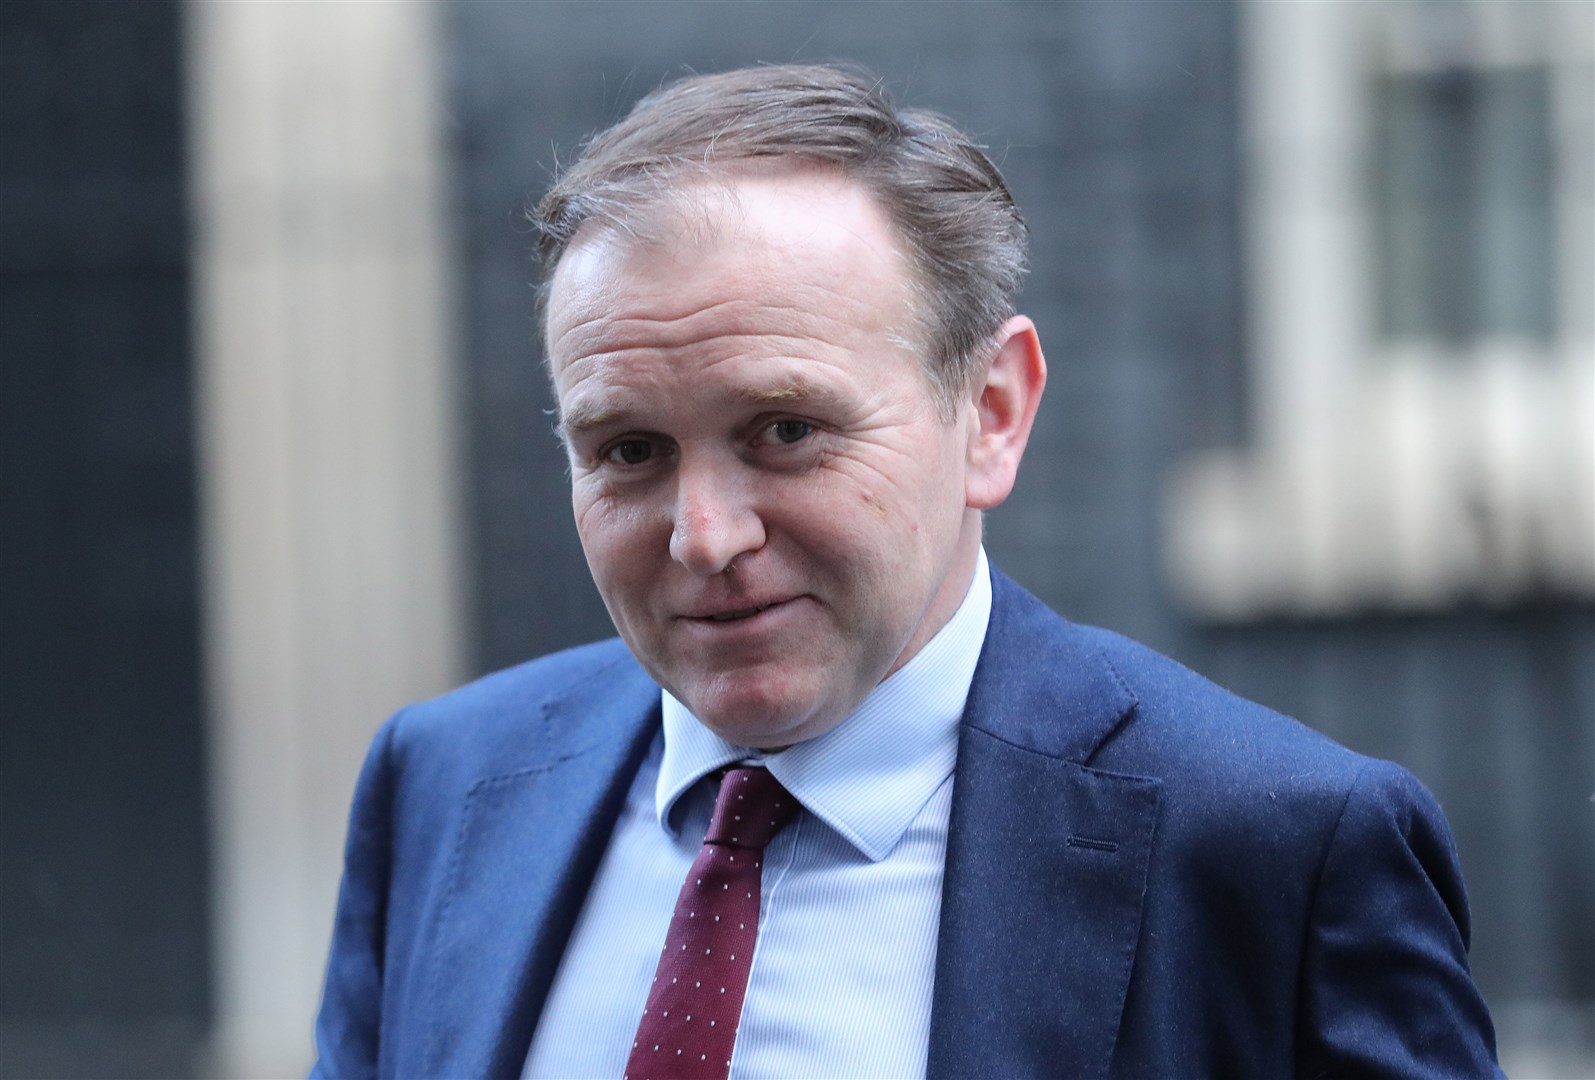 Environment Secretary George Eustice said a £23 million fund had been established to help exporters who were struggling with the paperwork (Aaron Chown/PA)